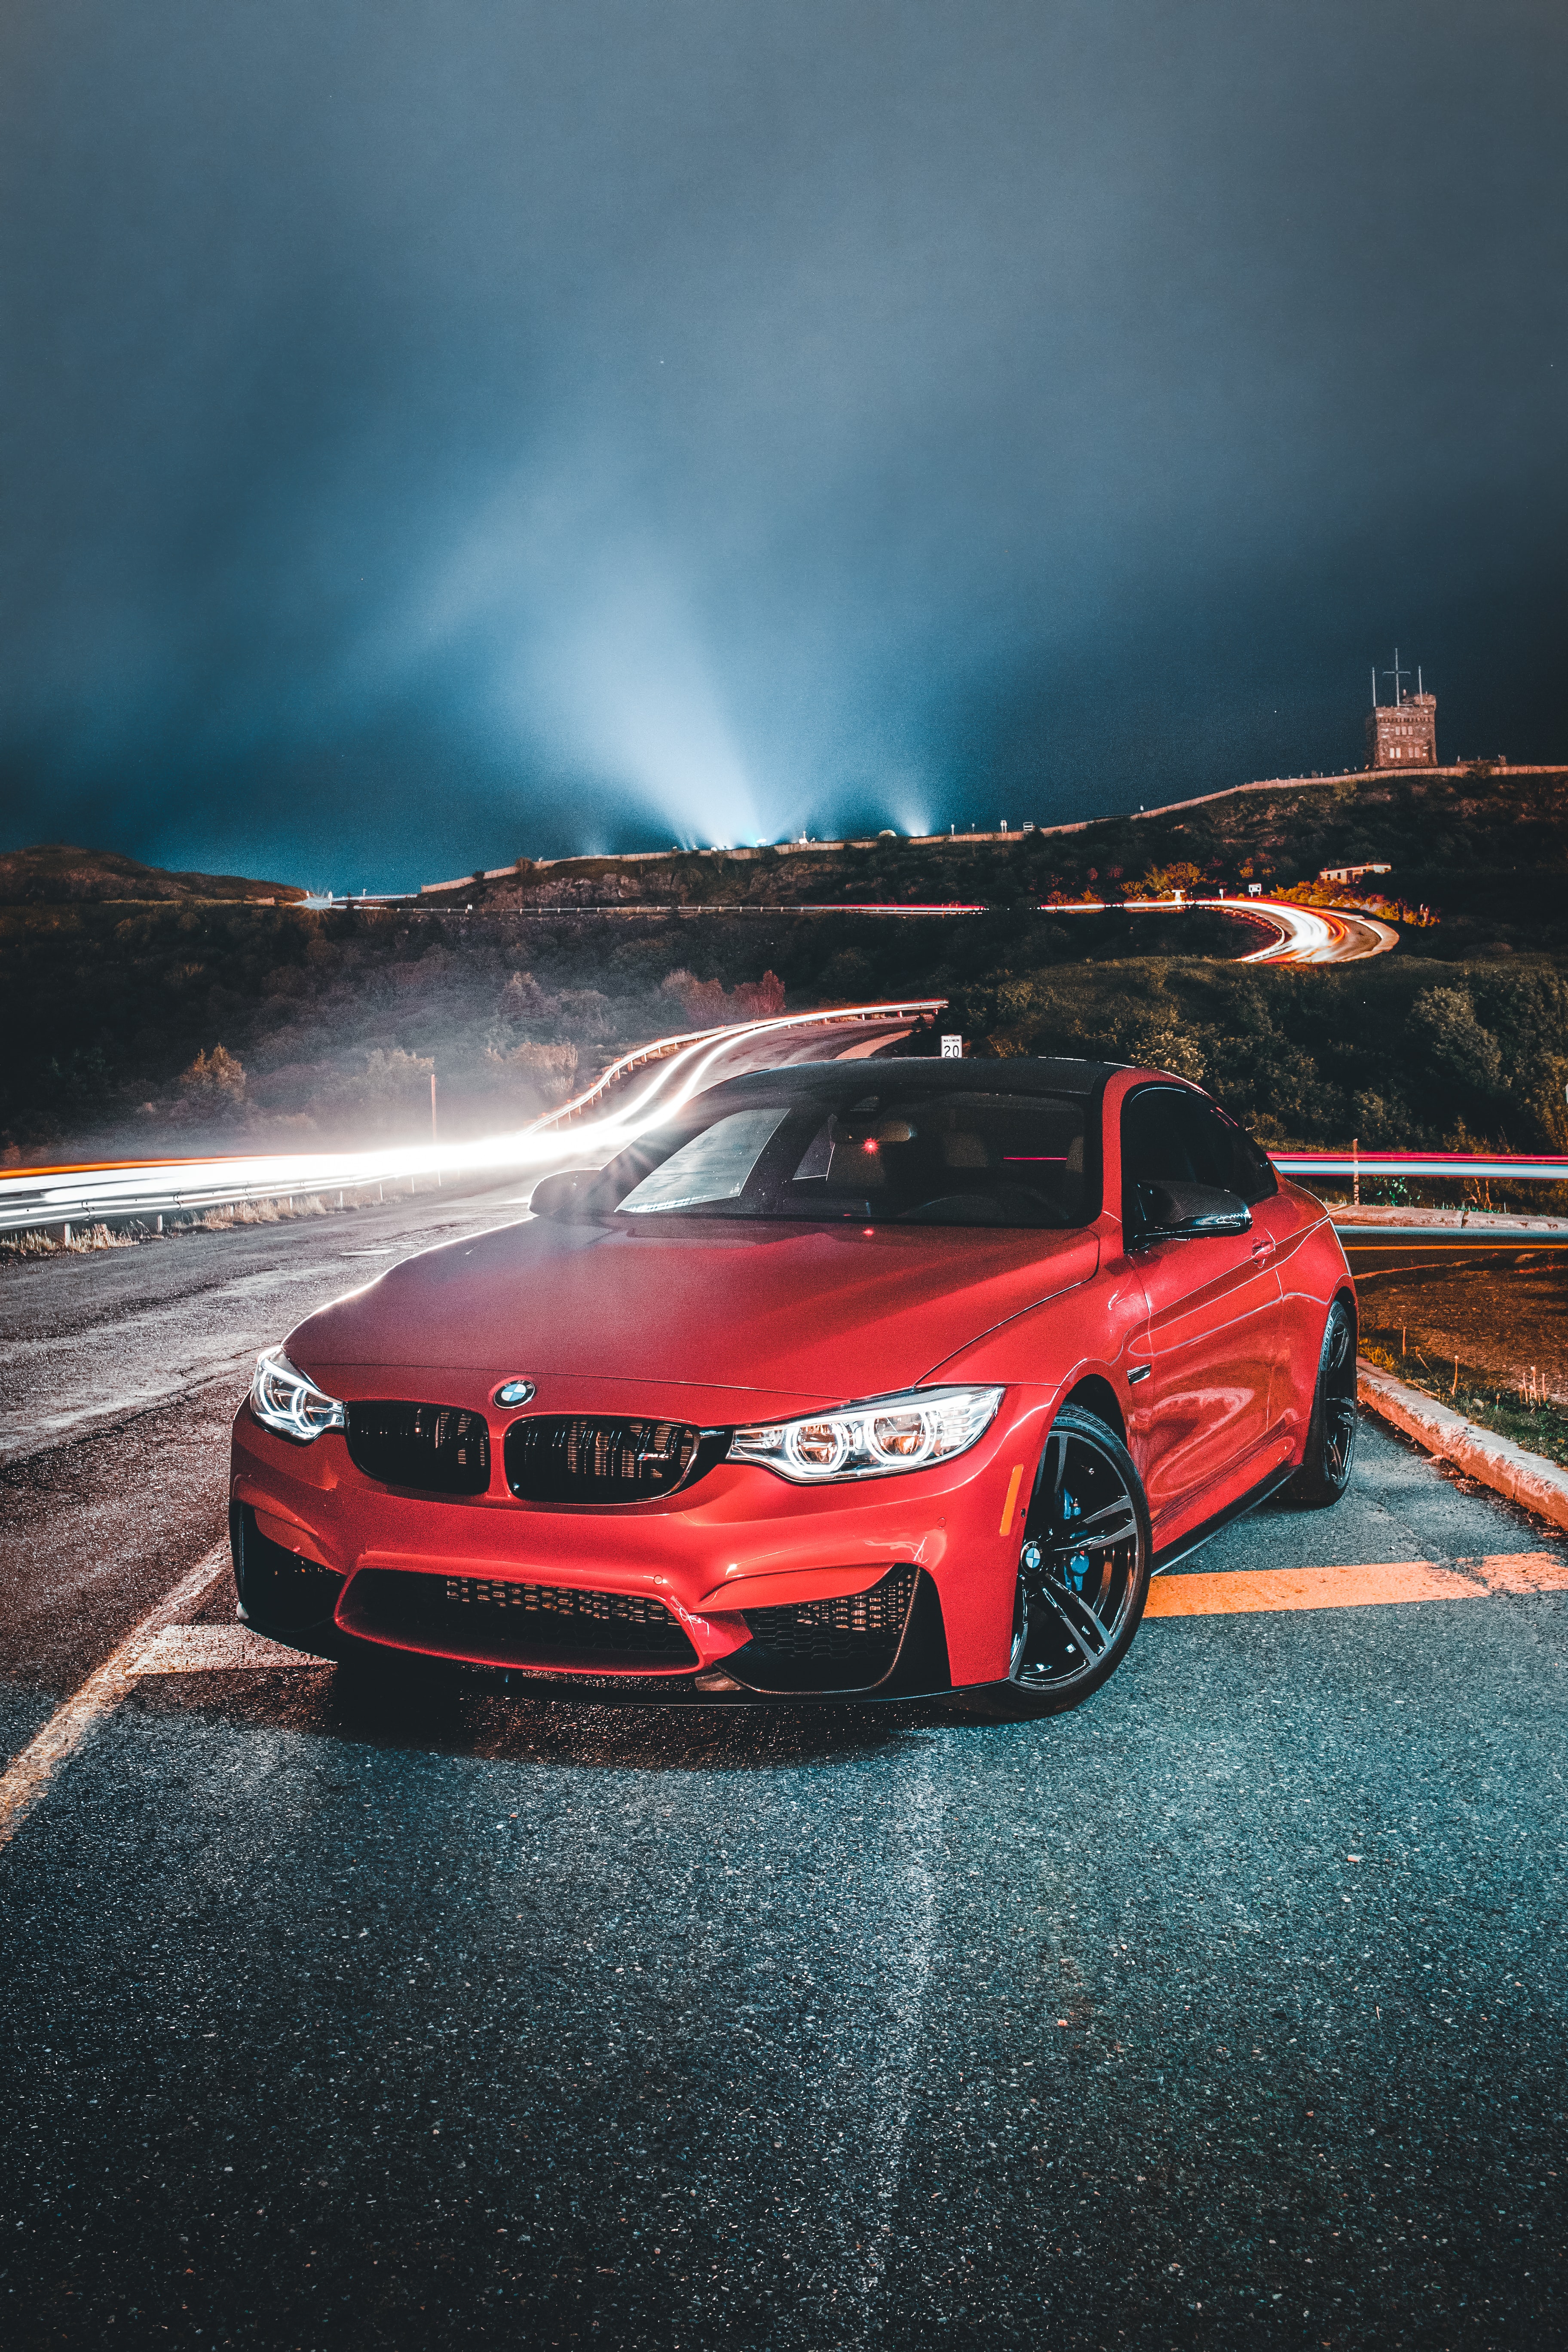 bmw 320i, bmw, front view, cars, red, road, car, machine